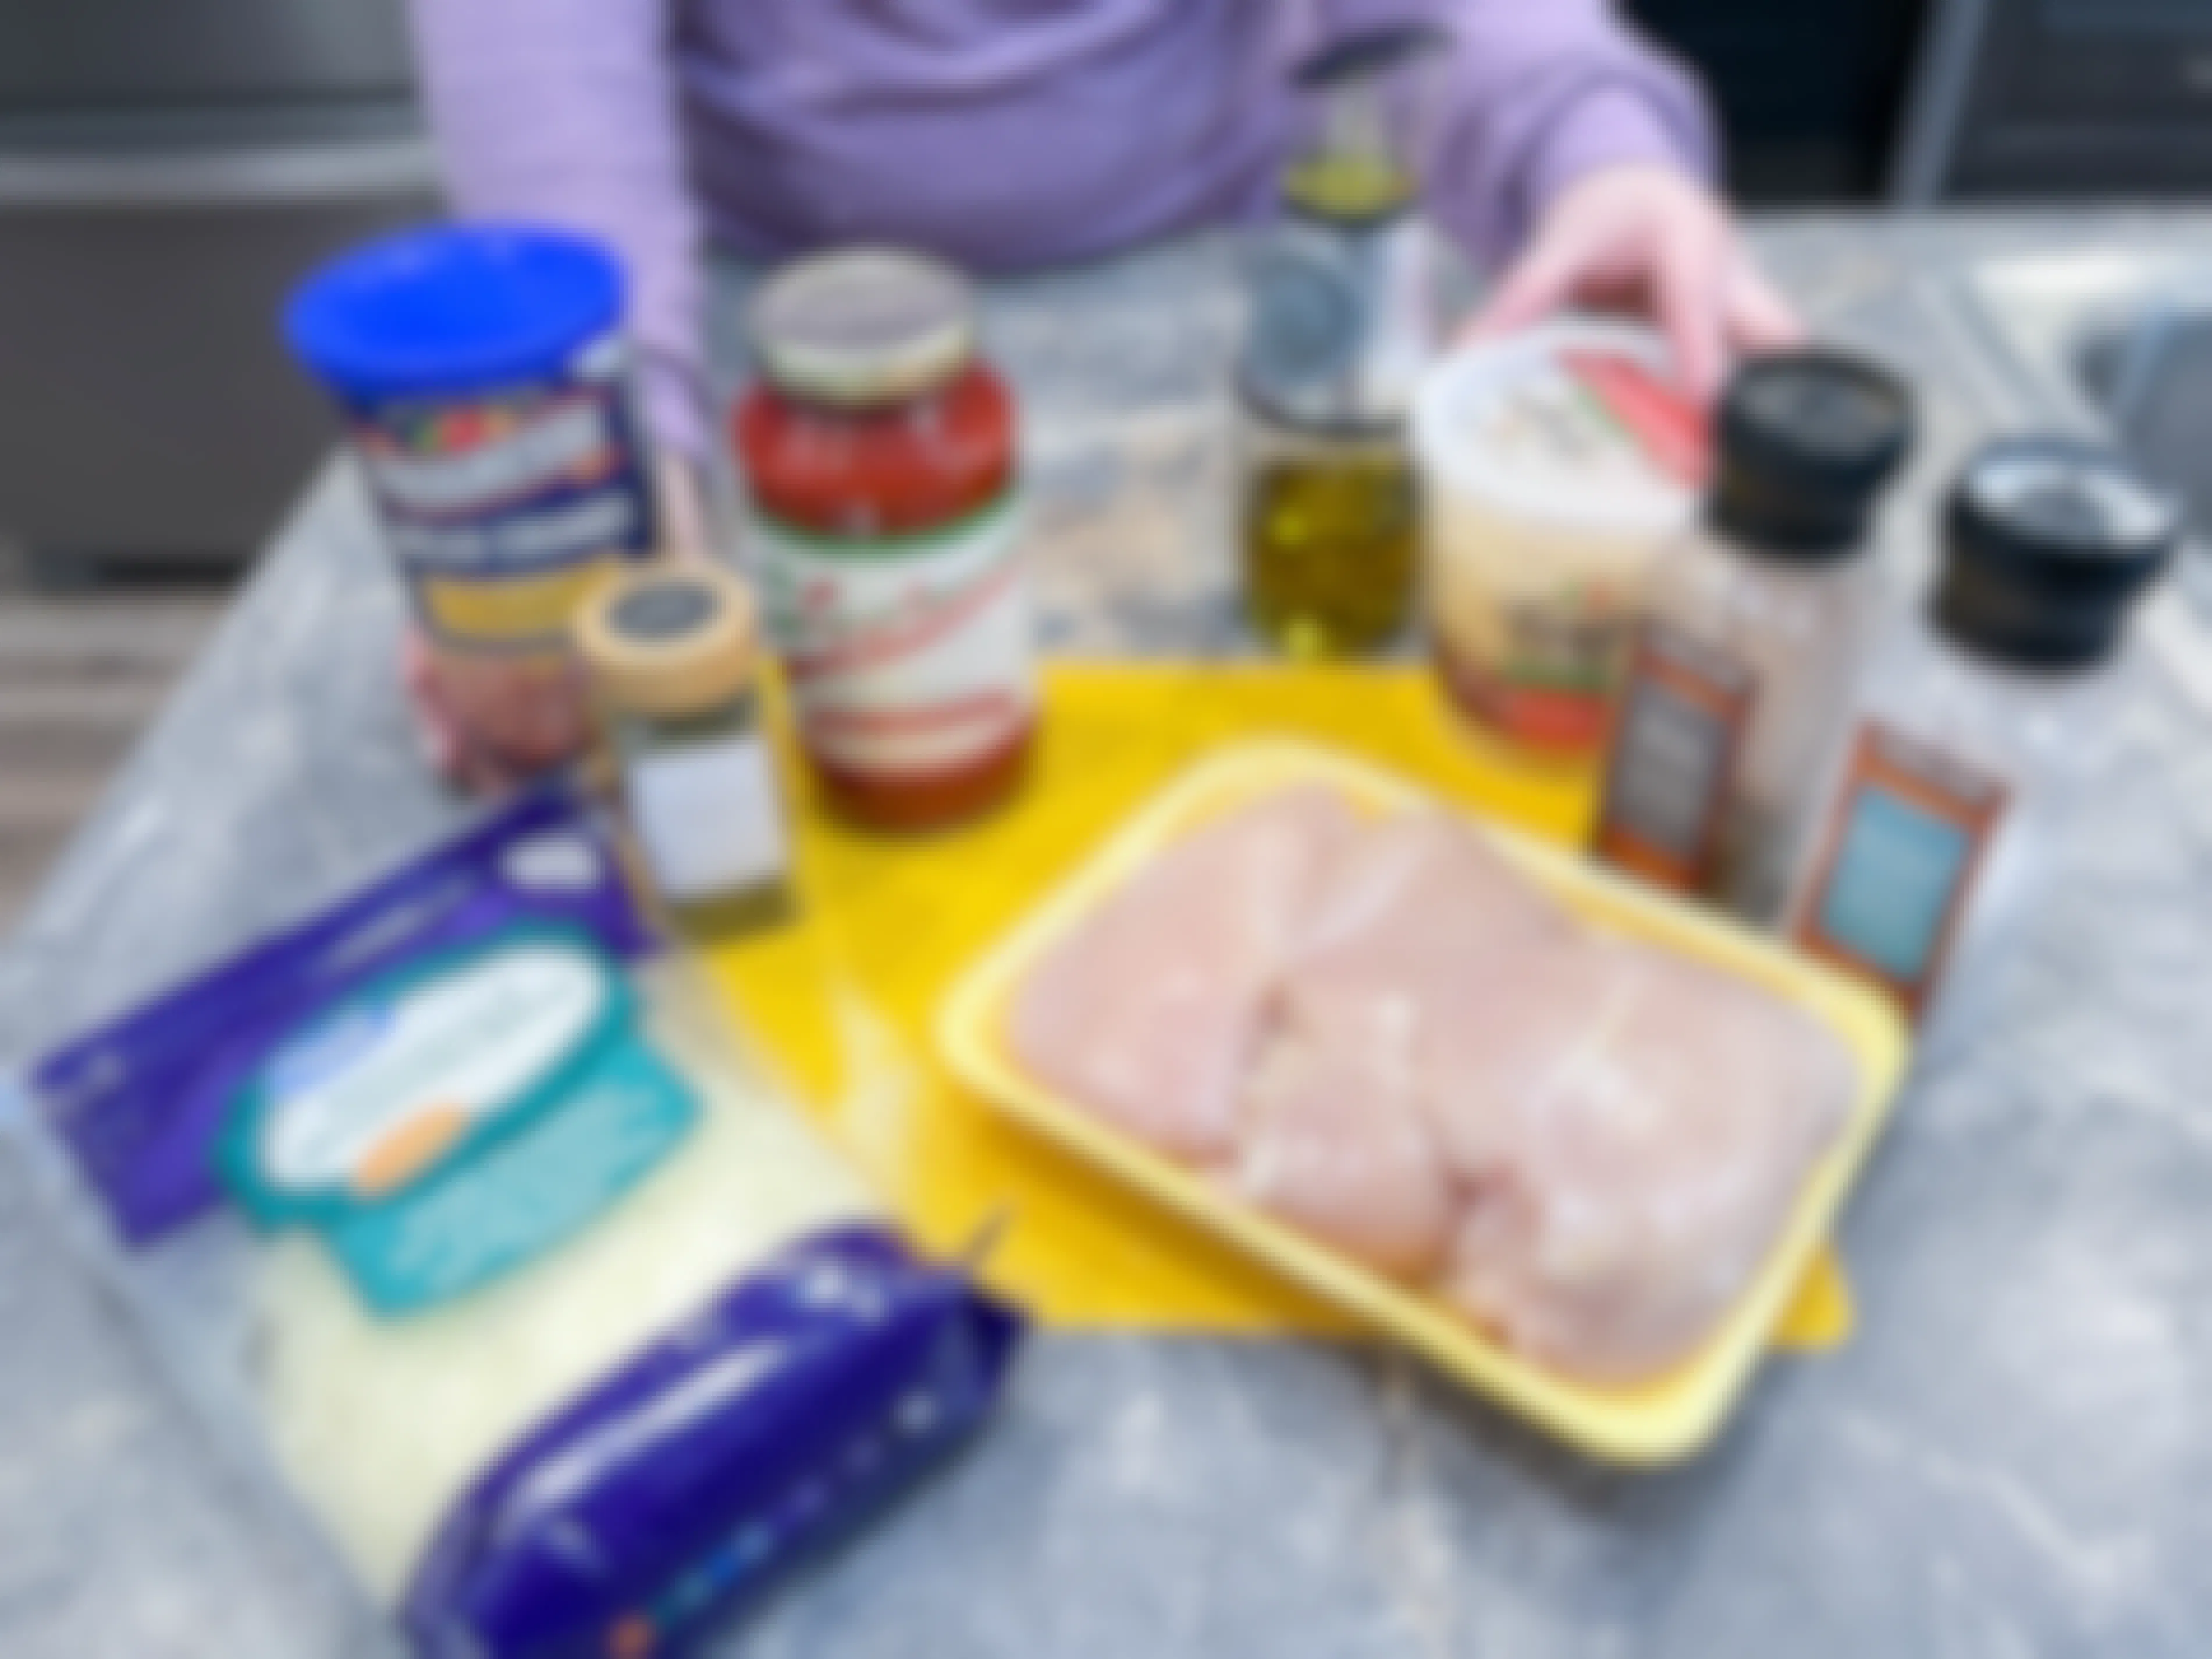 ingredients on a counter with a person about to make a freezer meals 